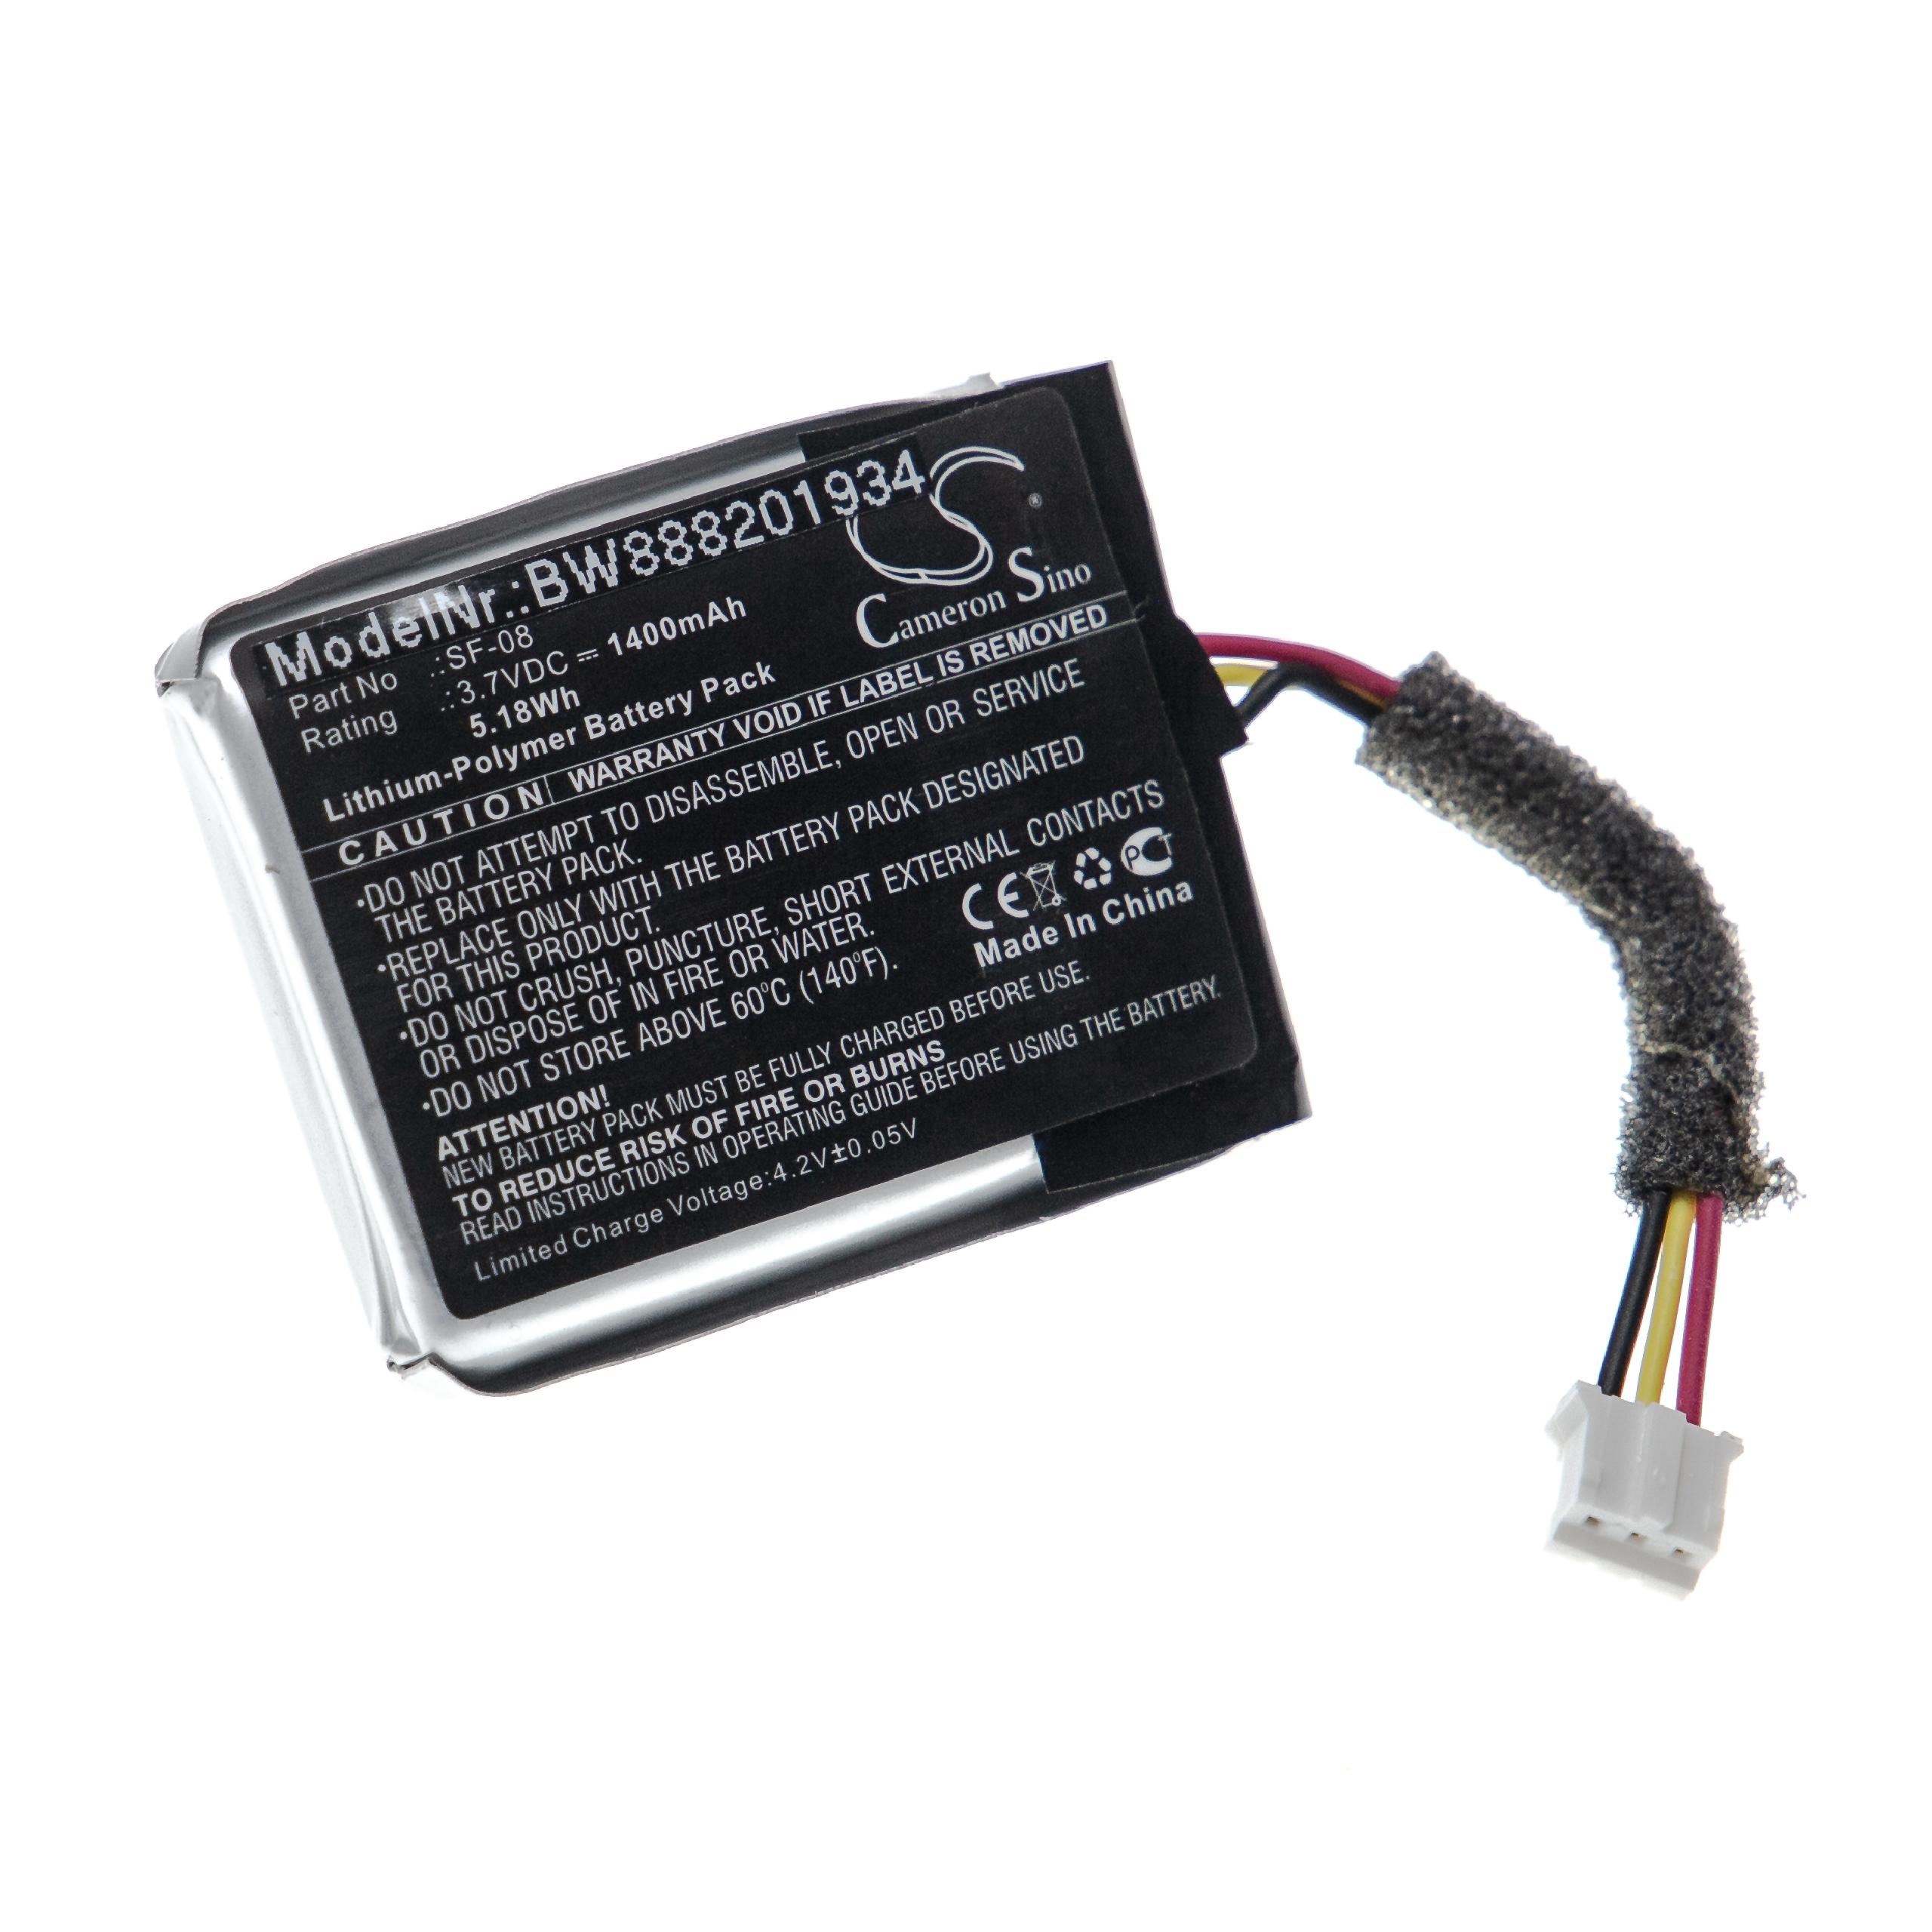  Battery replaces Sony SF-08 for SonyLoudspeaker - Li-polymer 1400 mAh 1 cell